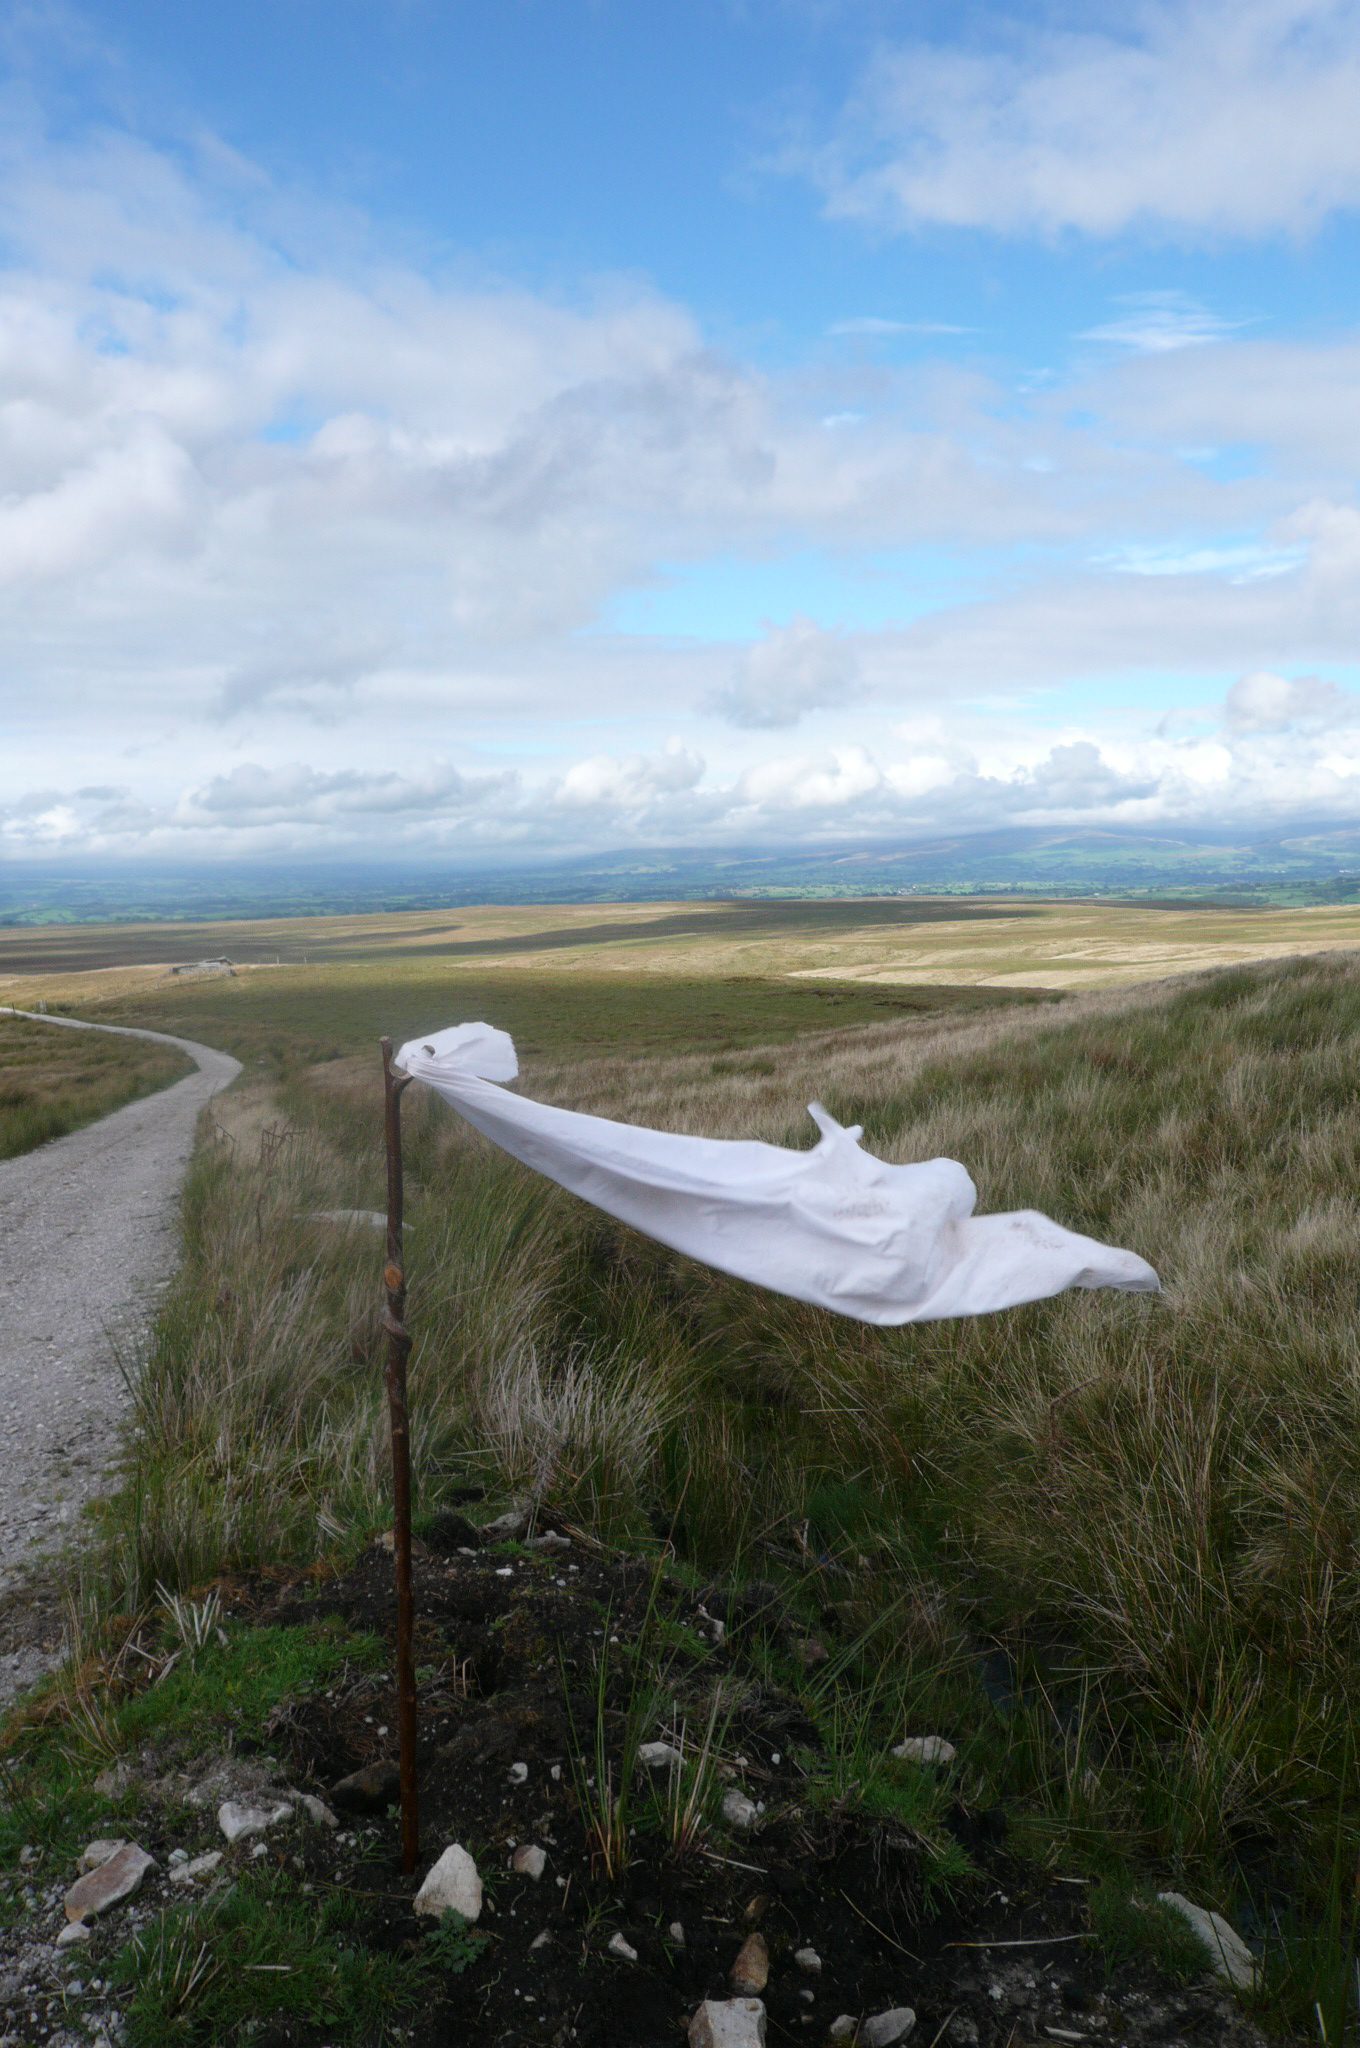 Photograph of a moorland landscape with blue clouded sky above. In the foreground a white sheet is caught on a wooden stick, and billows out across the foreground.